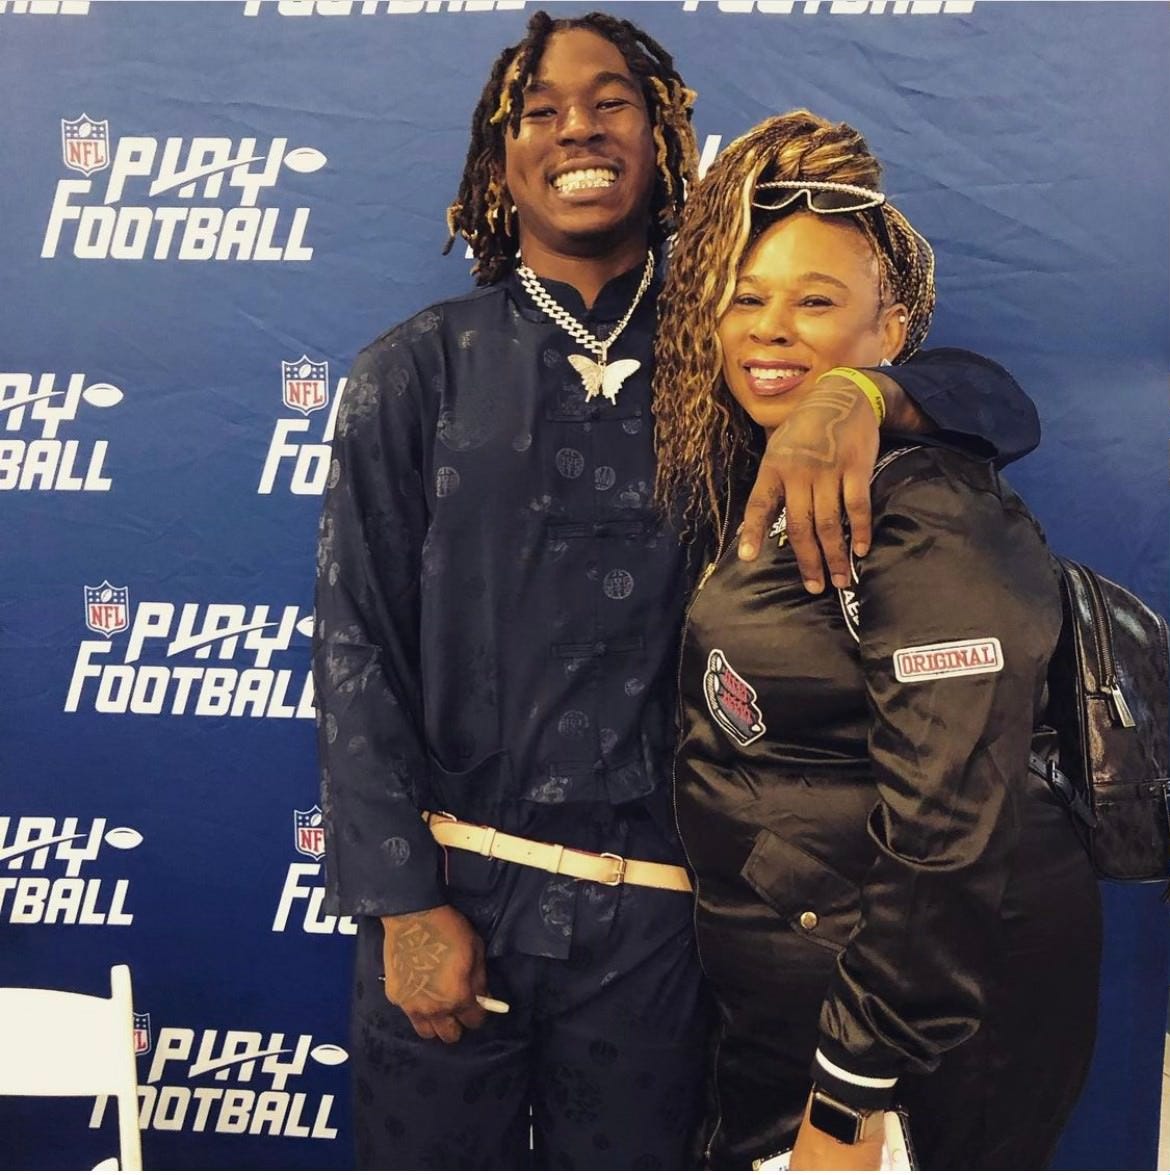 Lions RB Jamaal Williams has a special connection to the women in his life